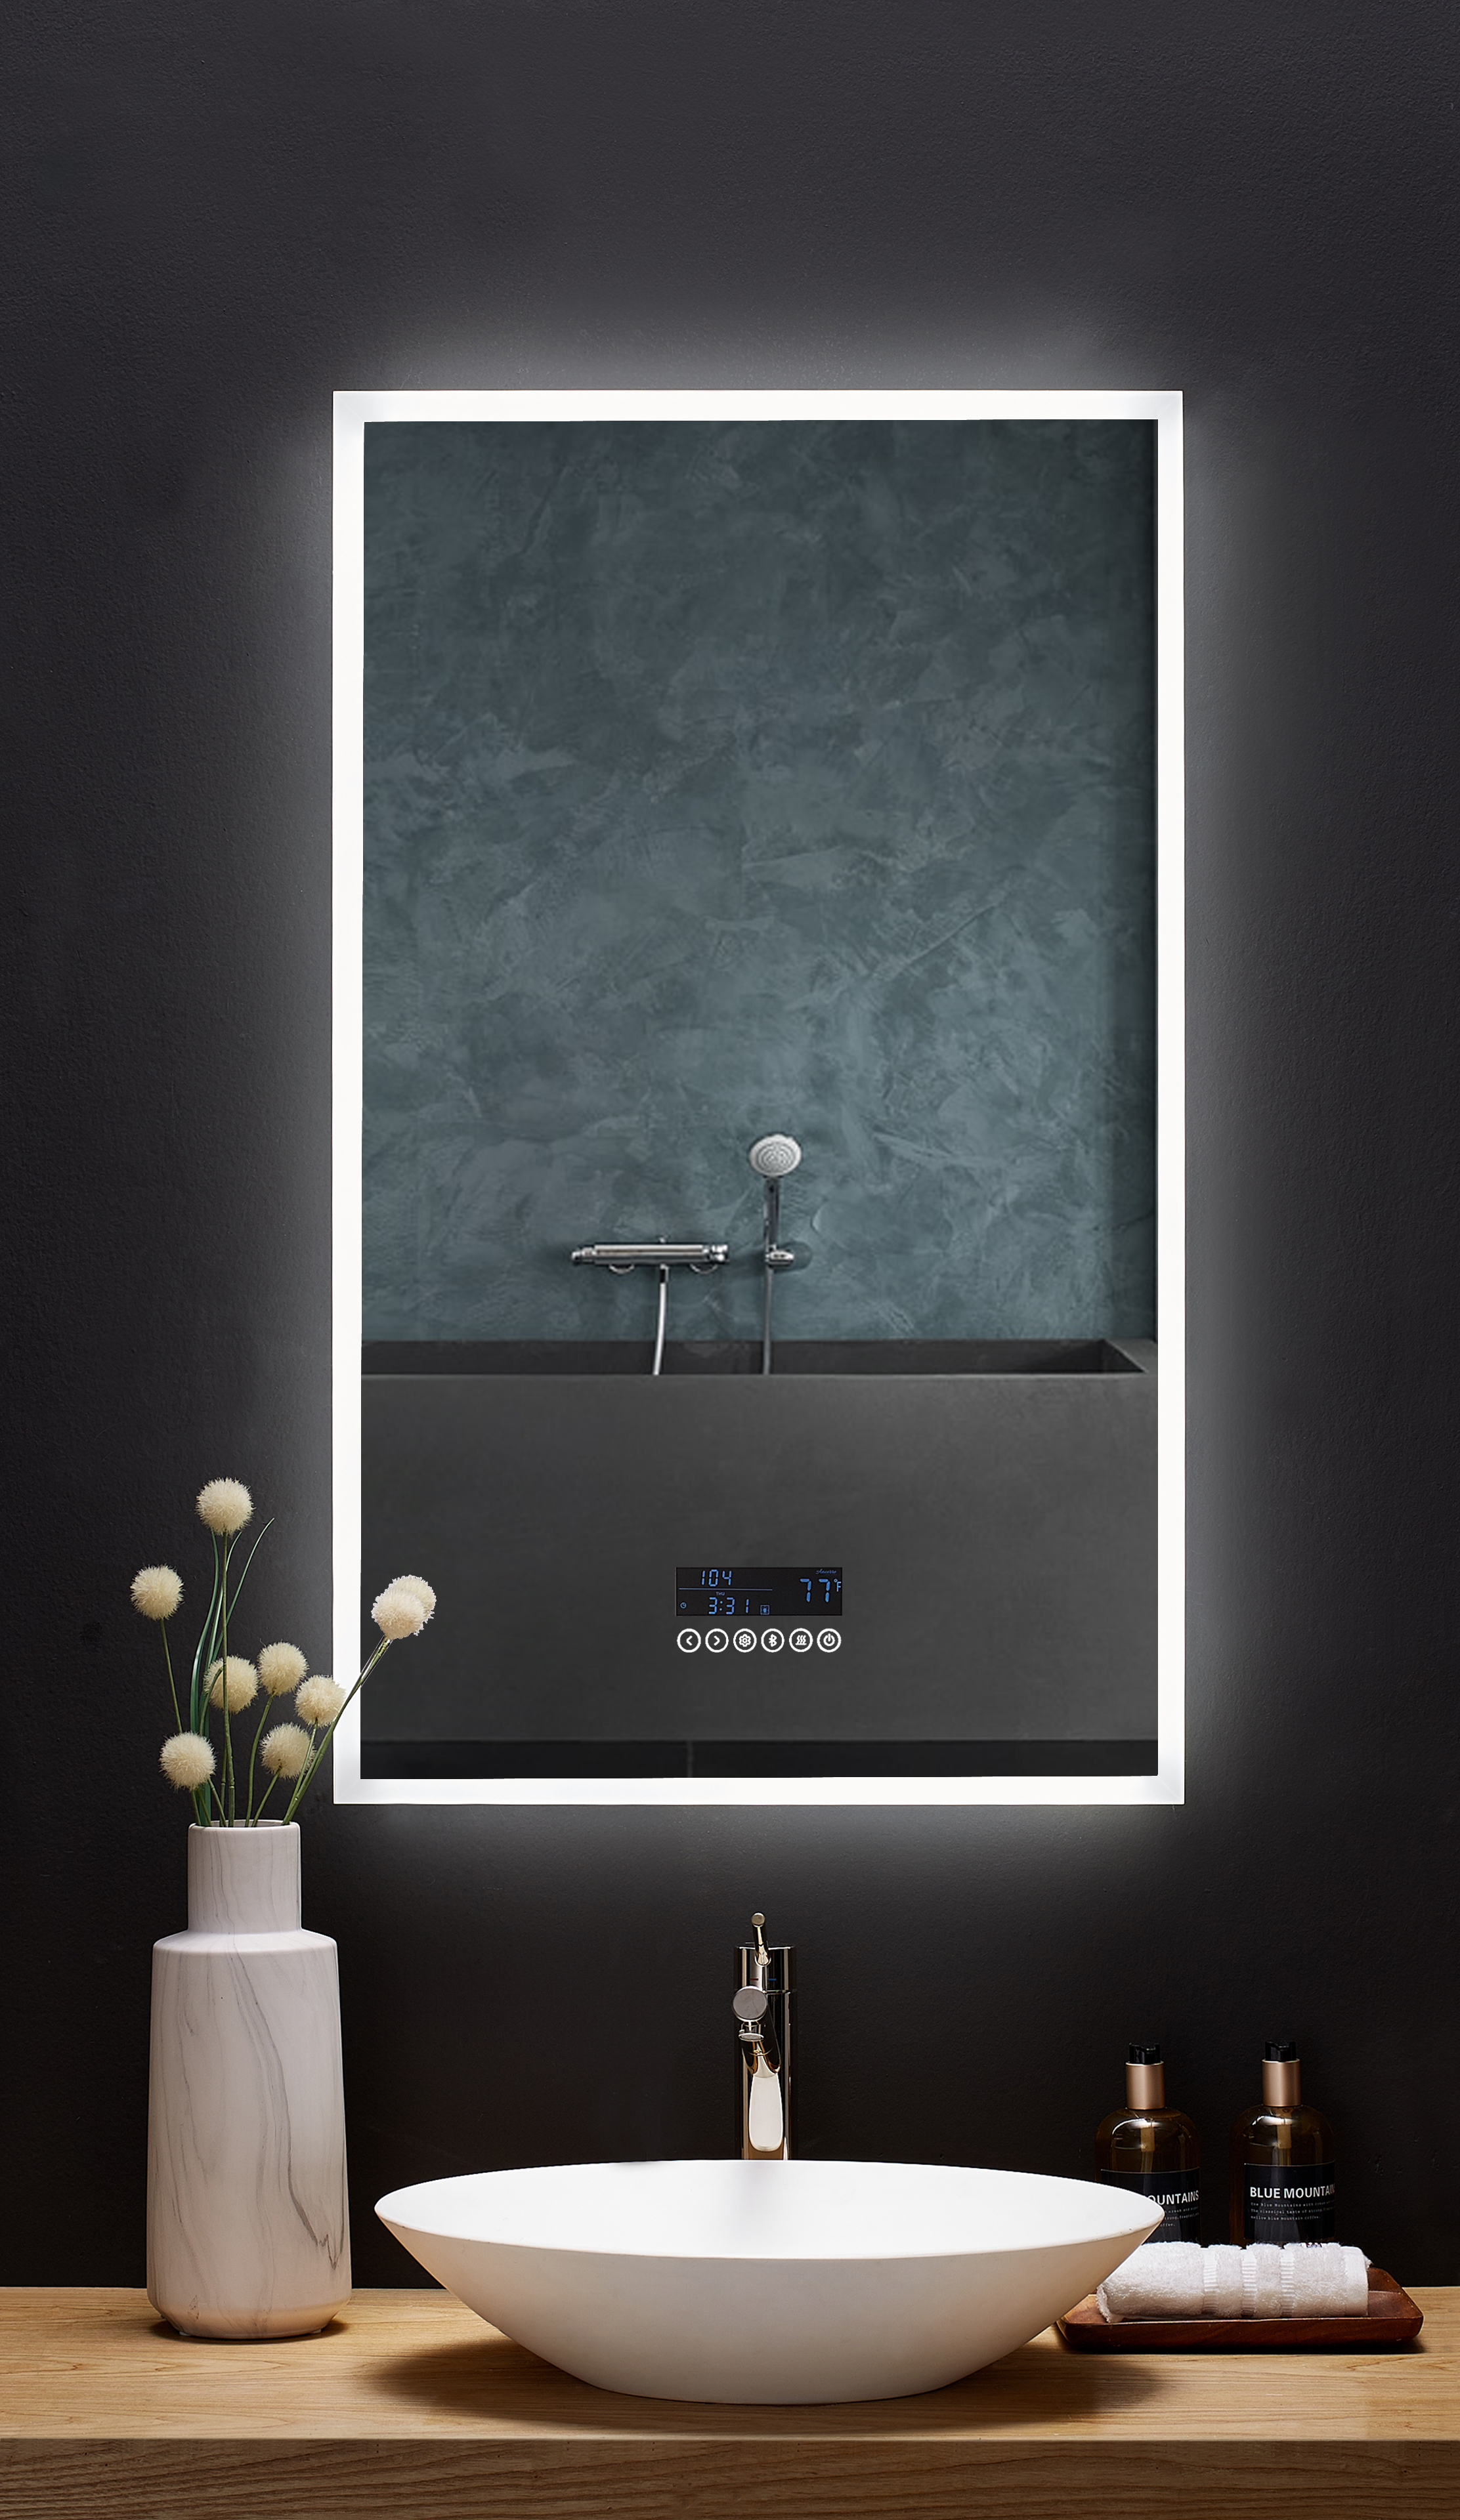 24 in. x 40 in. LED Frameless Mirror with Bluetooth, Defogger and Digital Display